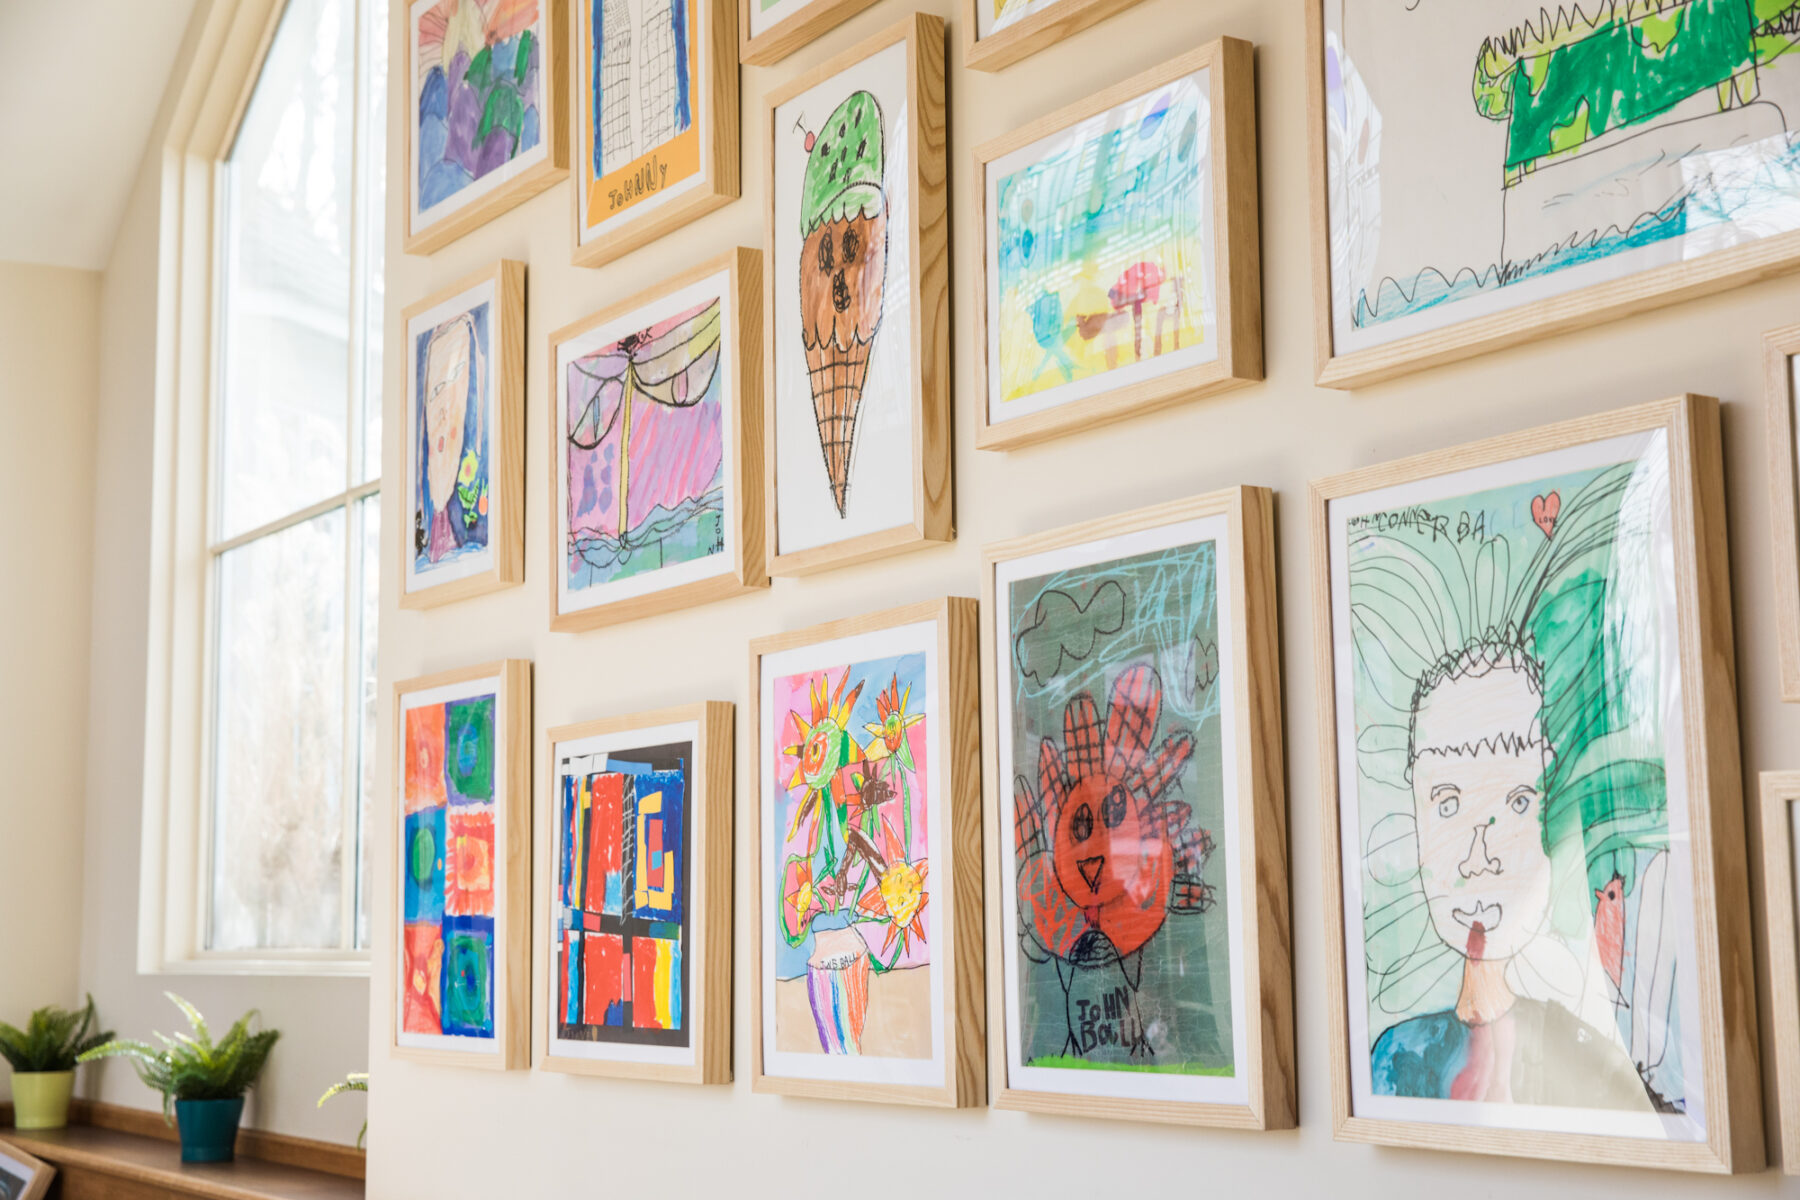 How to Create a Colorful School Themed Mini Gallery Wall